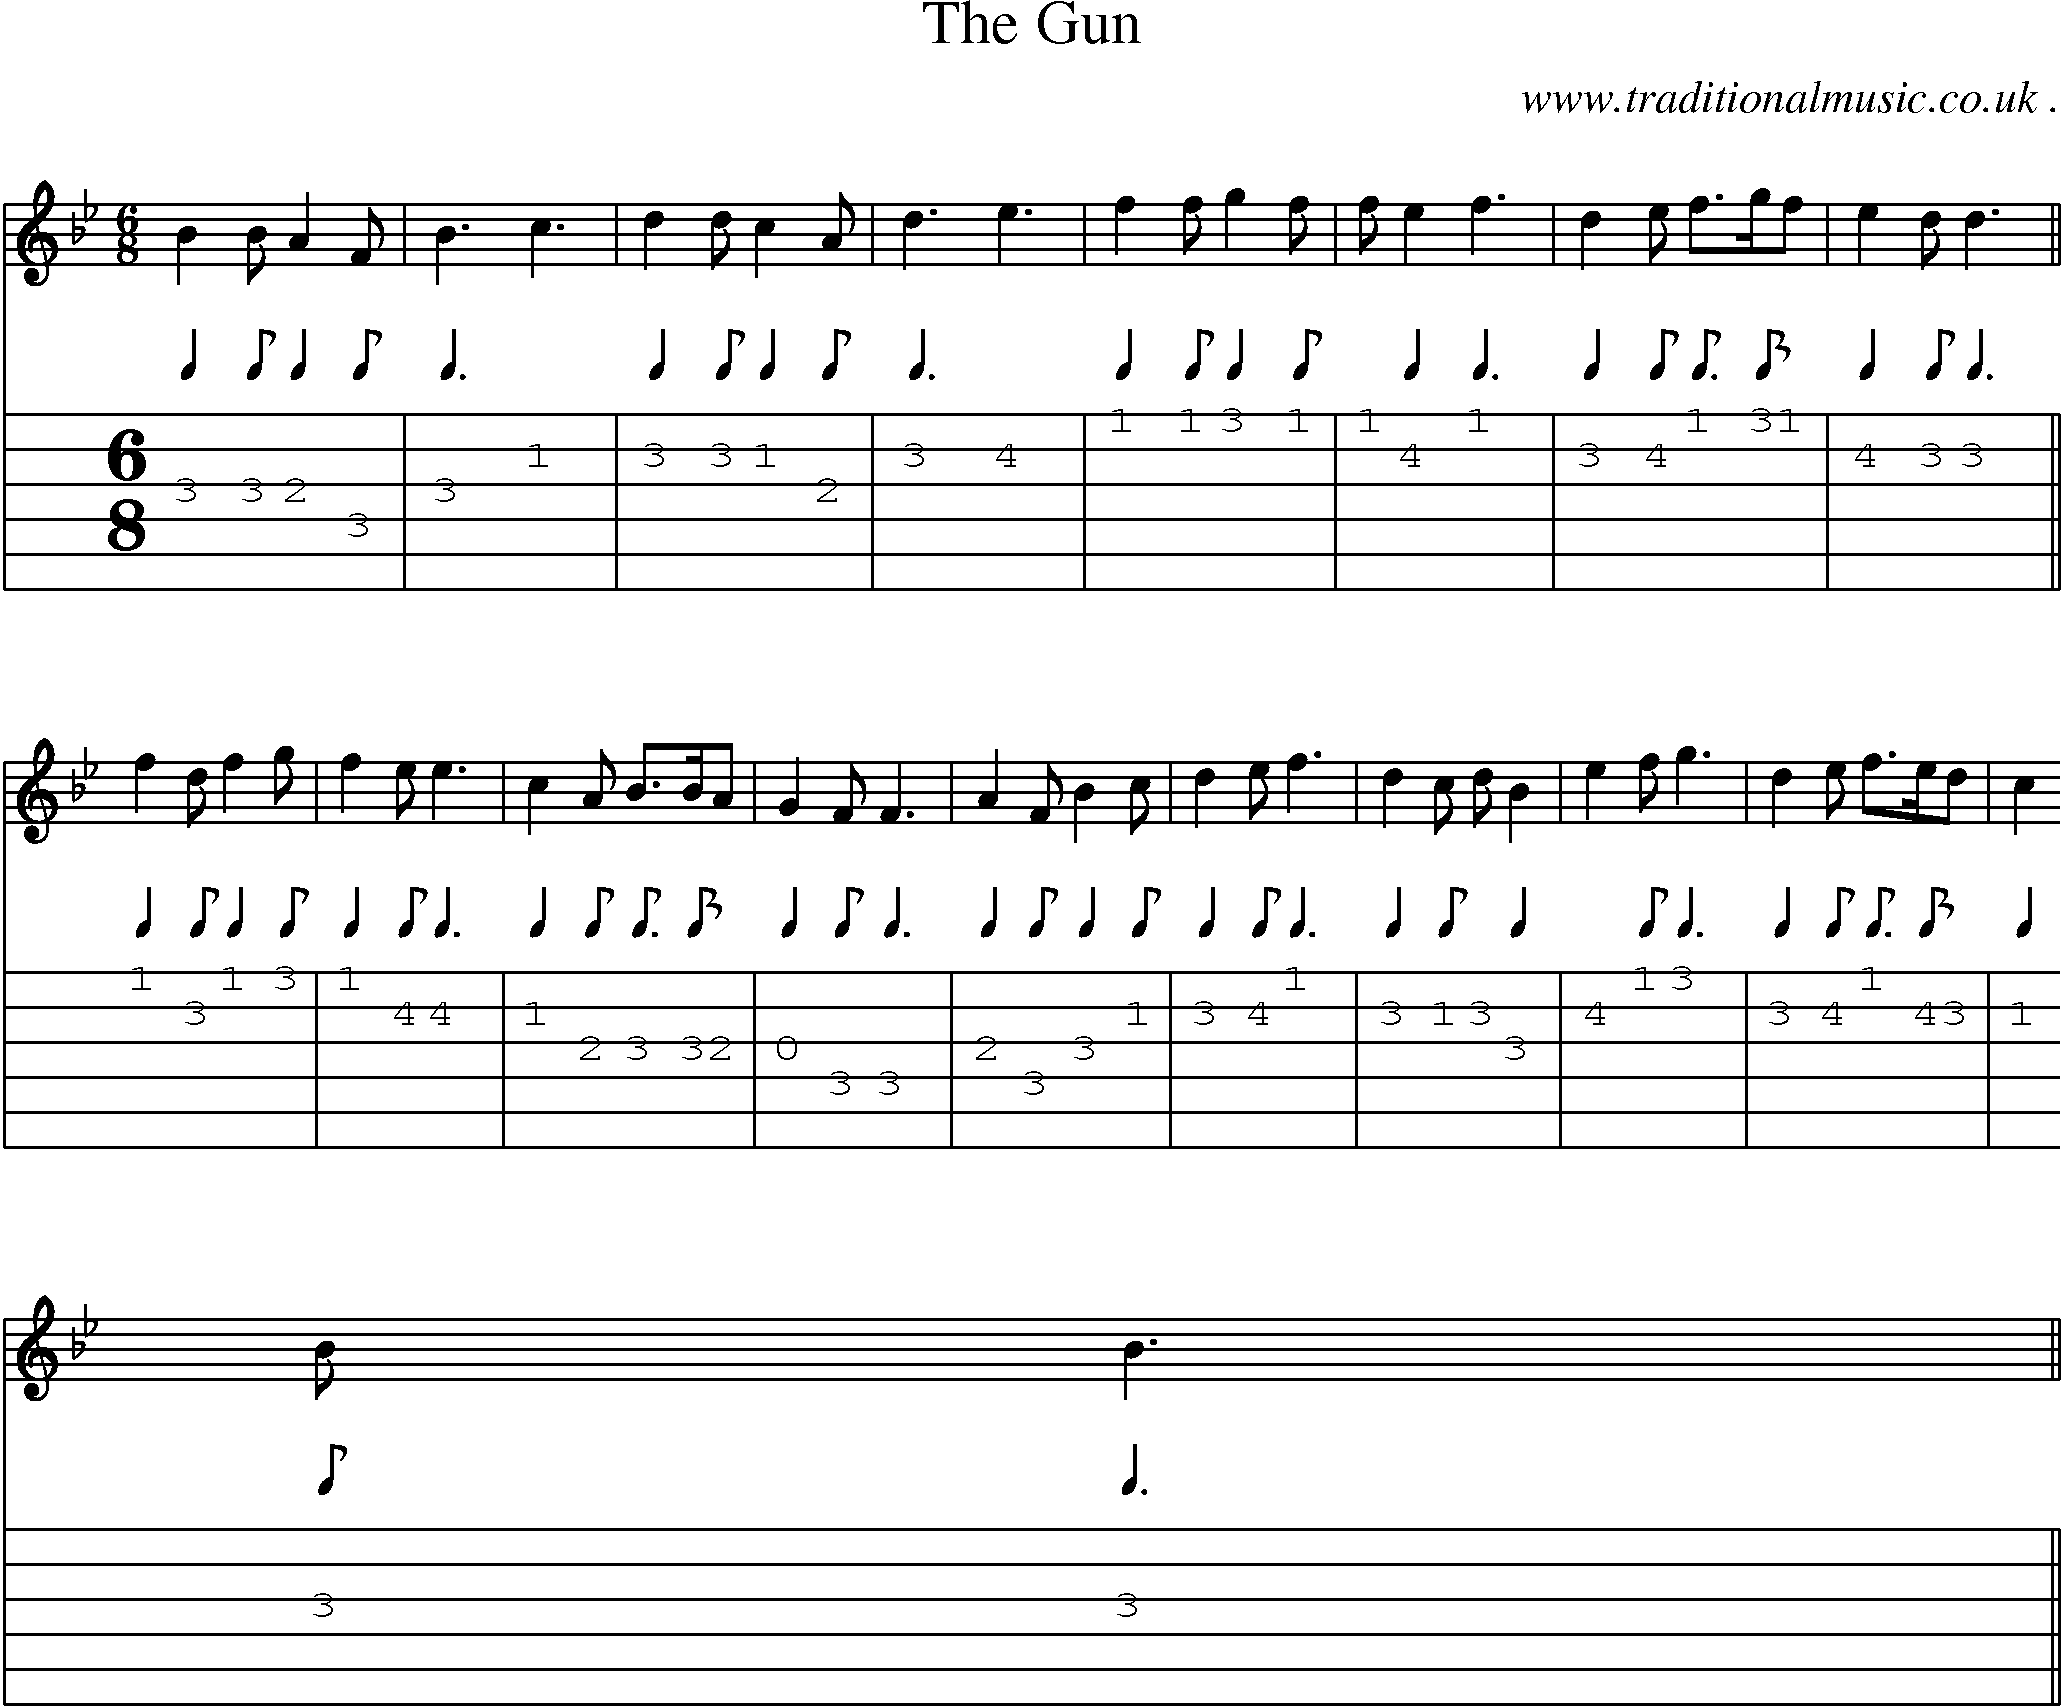 Sheet-Music and Guitar Tabs for The Gun